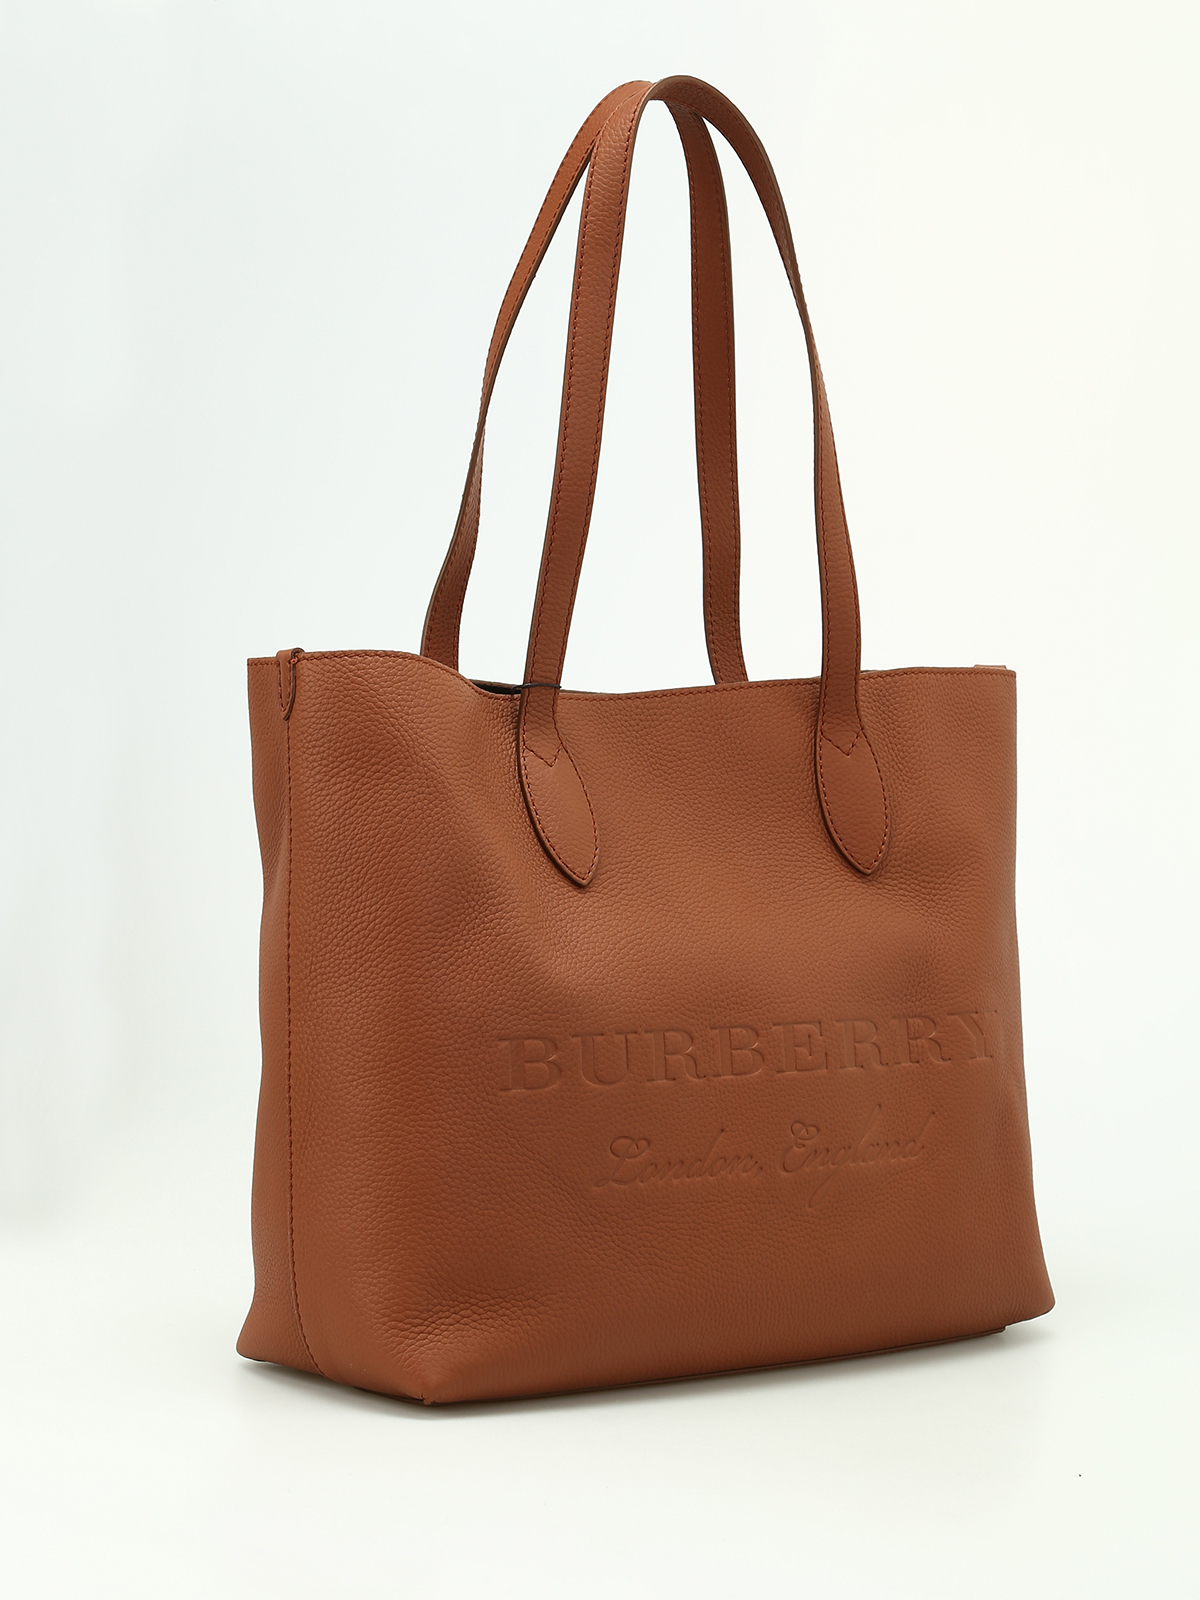 Remington brown leather large tote by Burberry - totes bags | iKRIX